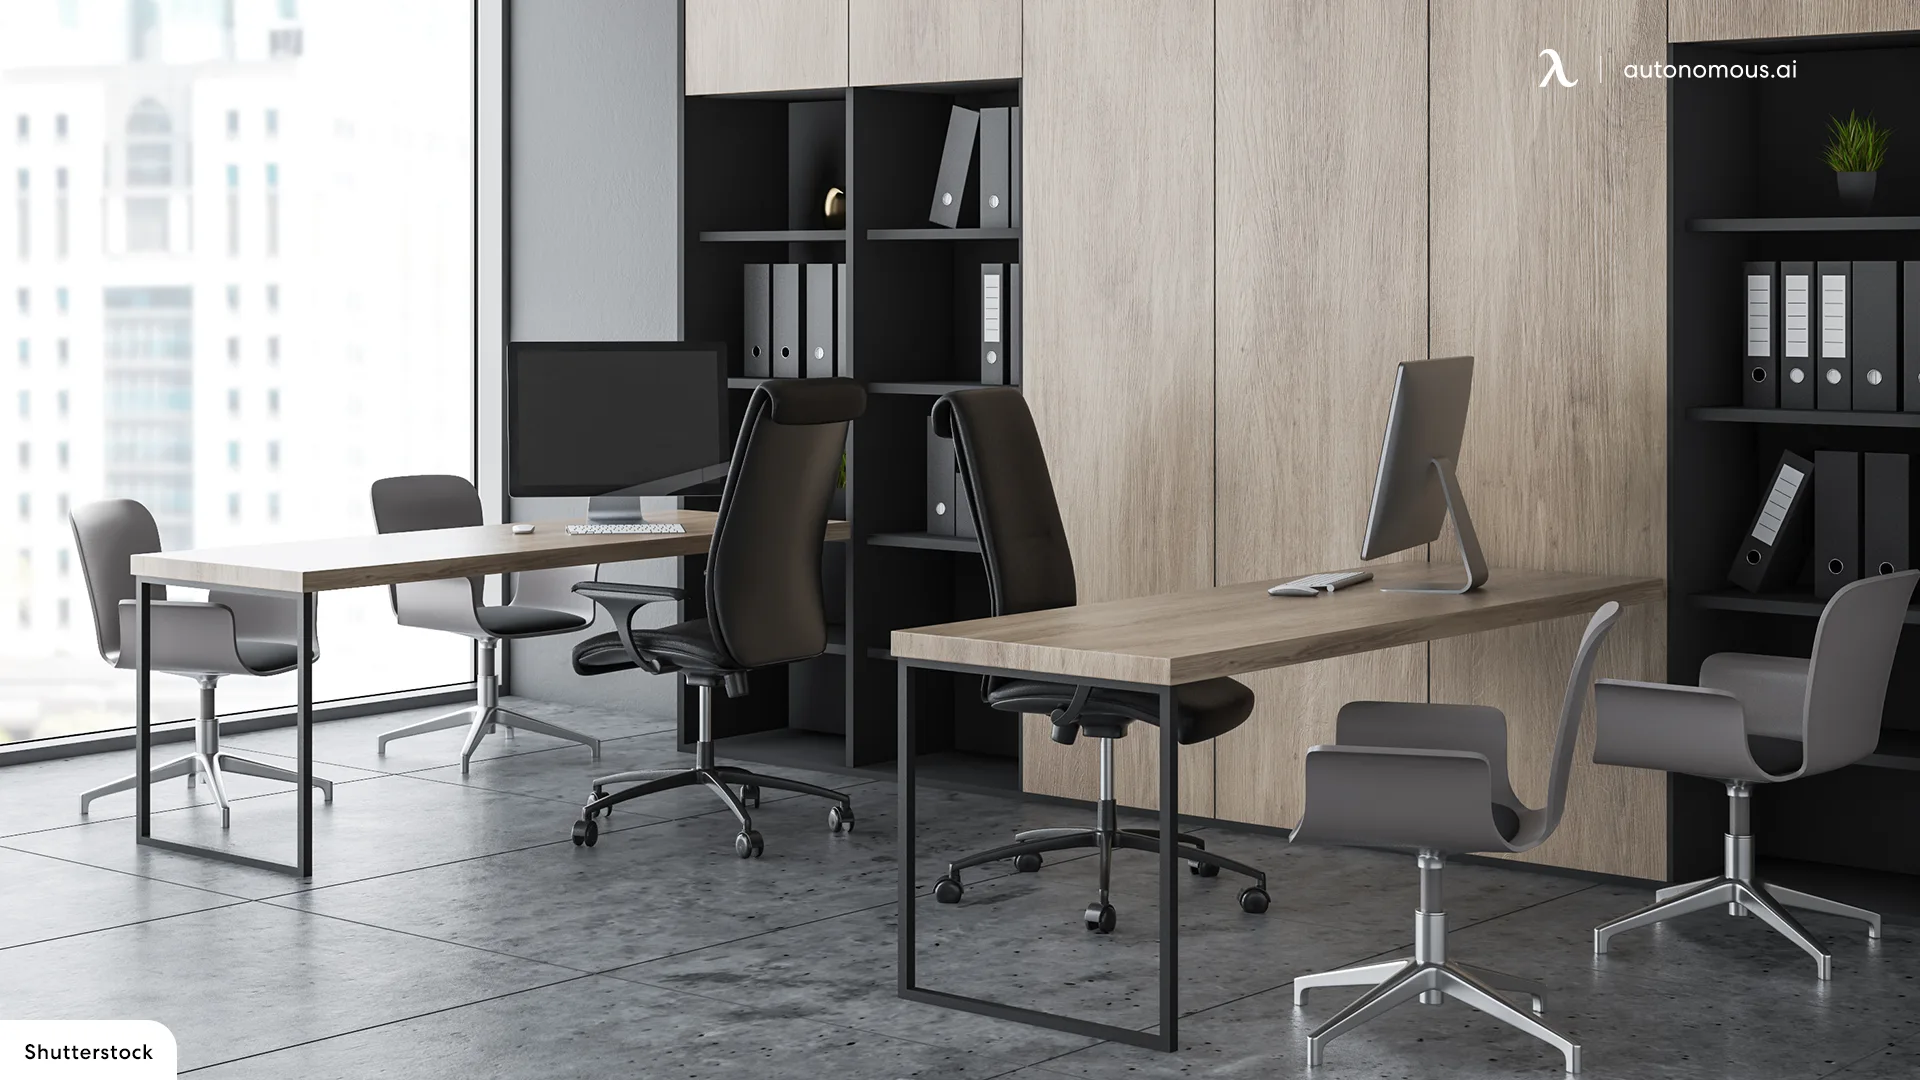 The 10 Best Chair Designs for an Office in 2023 (Tested by Experts)